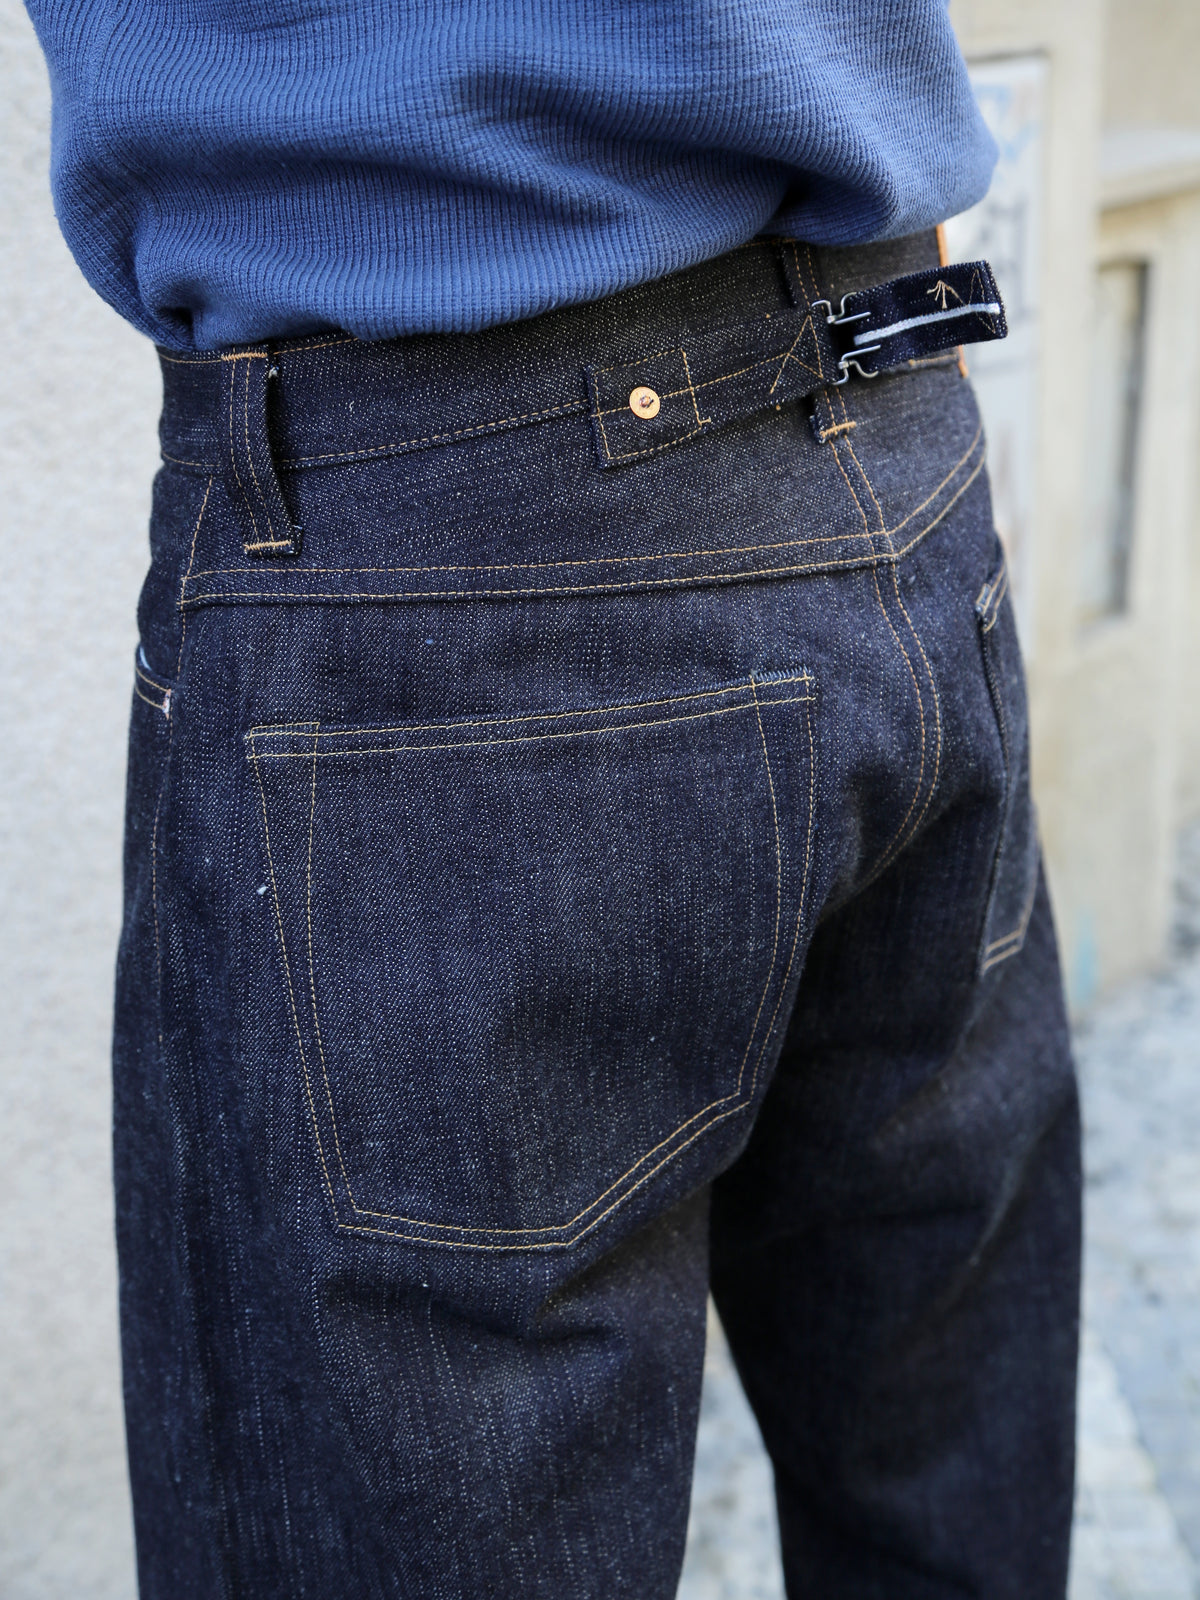 The Real McCoy's LOT.900S Jeans, MP18105